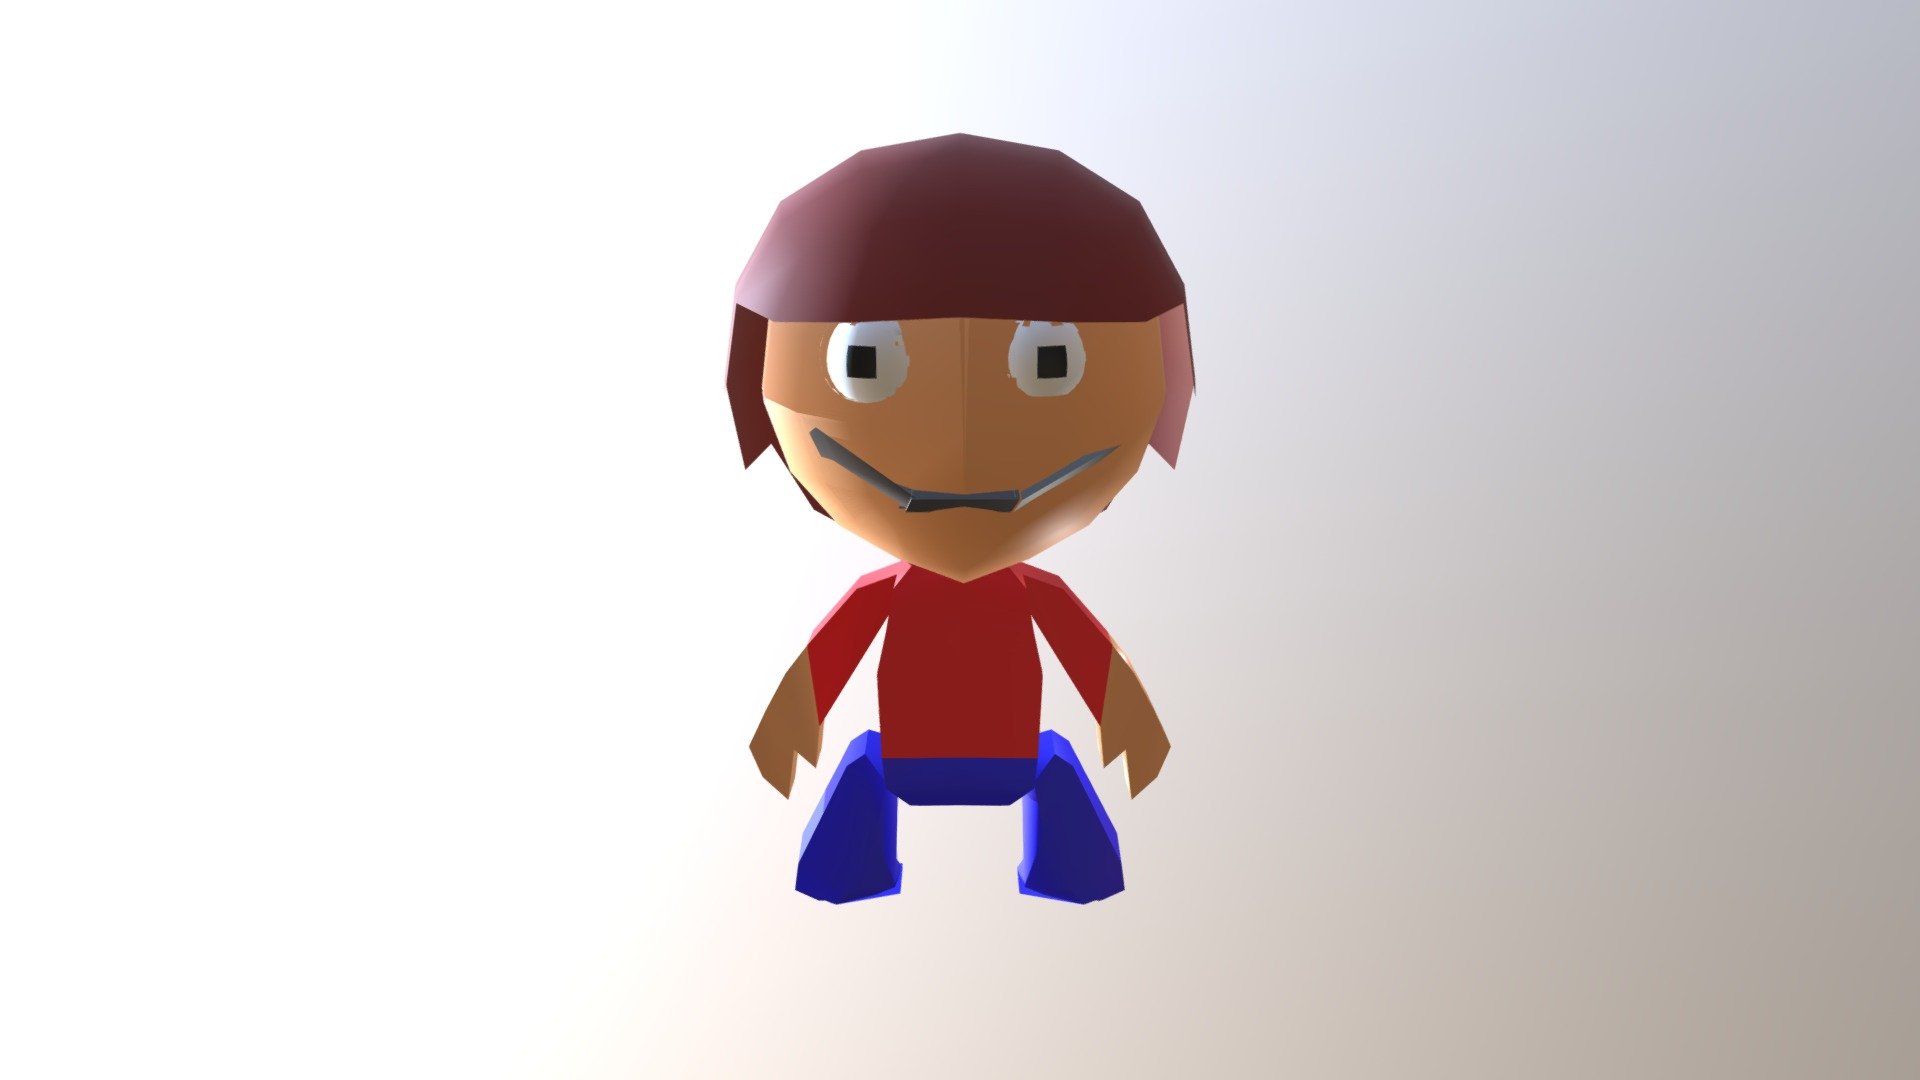 My first blender model (colored version)